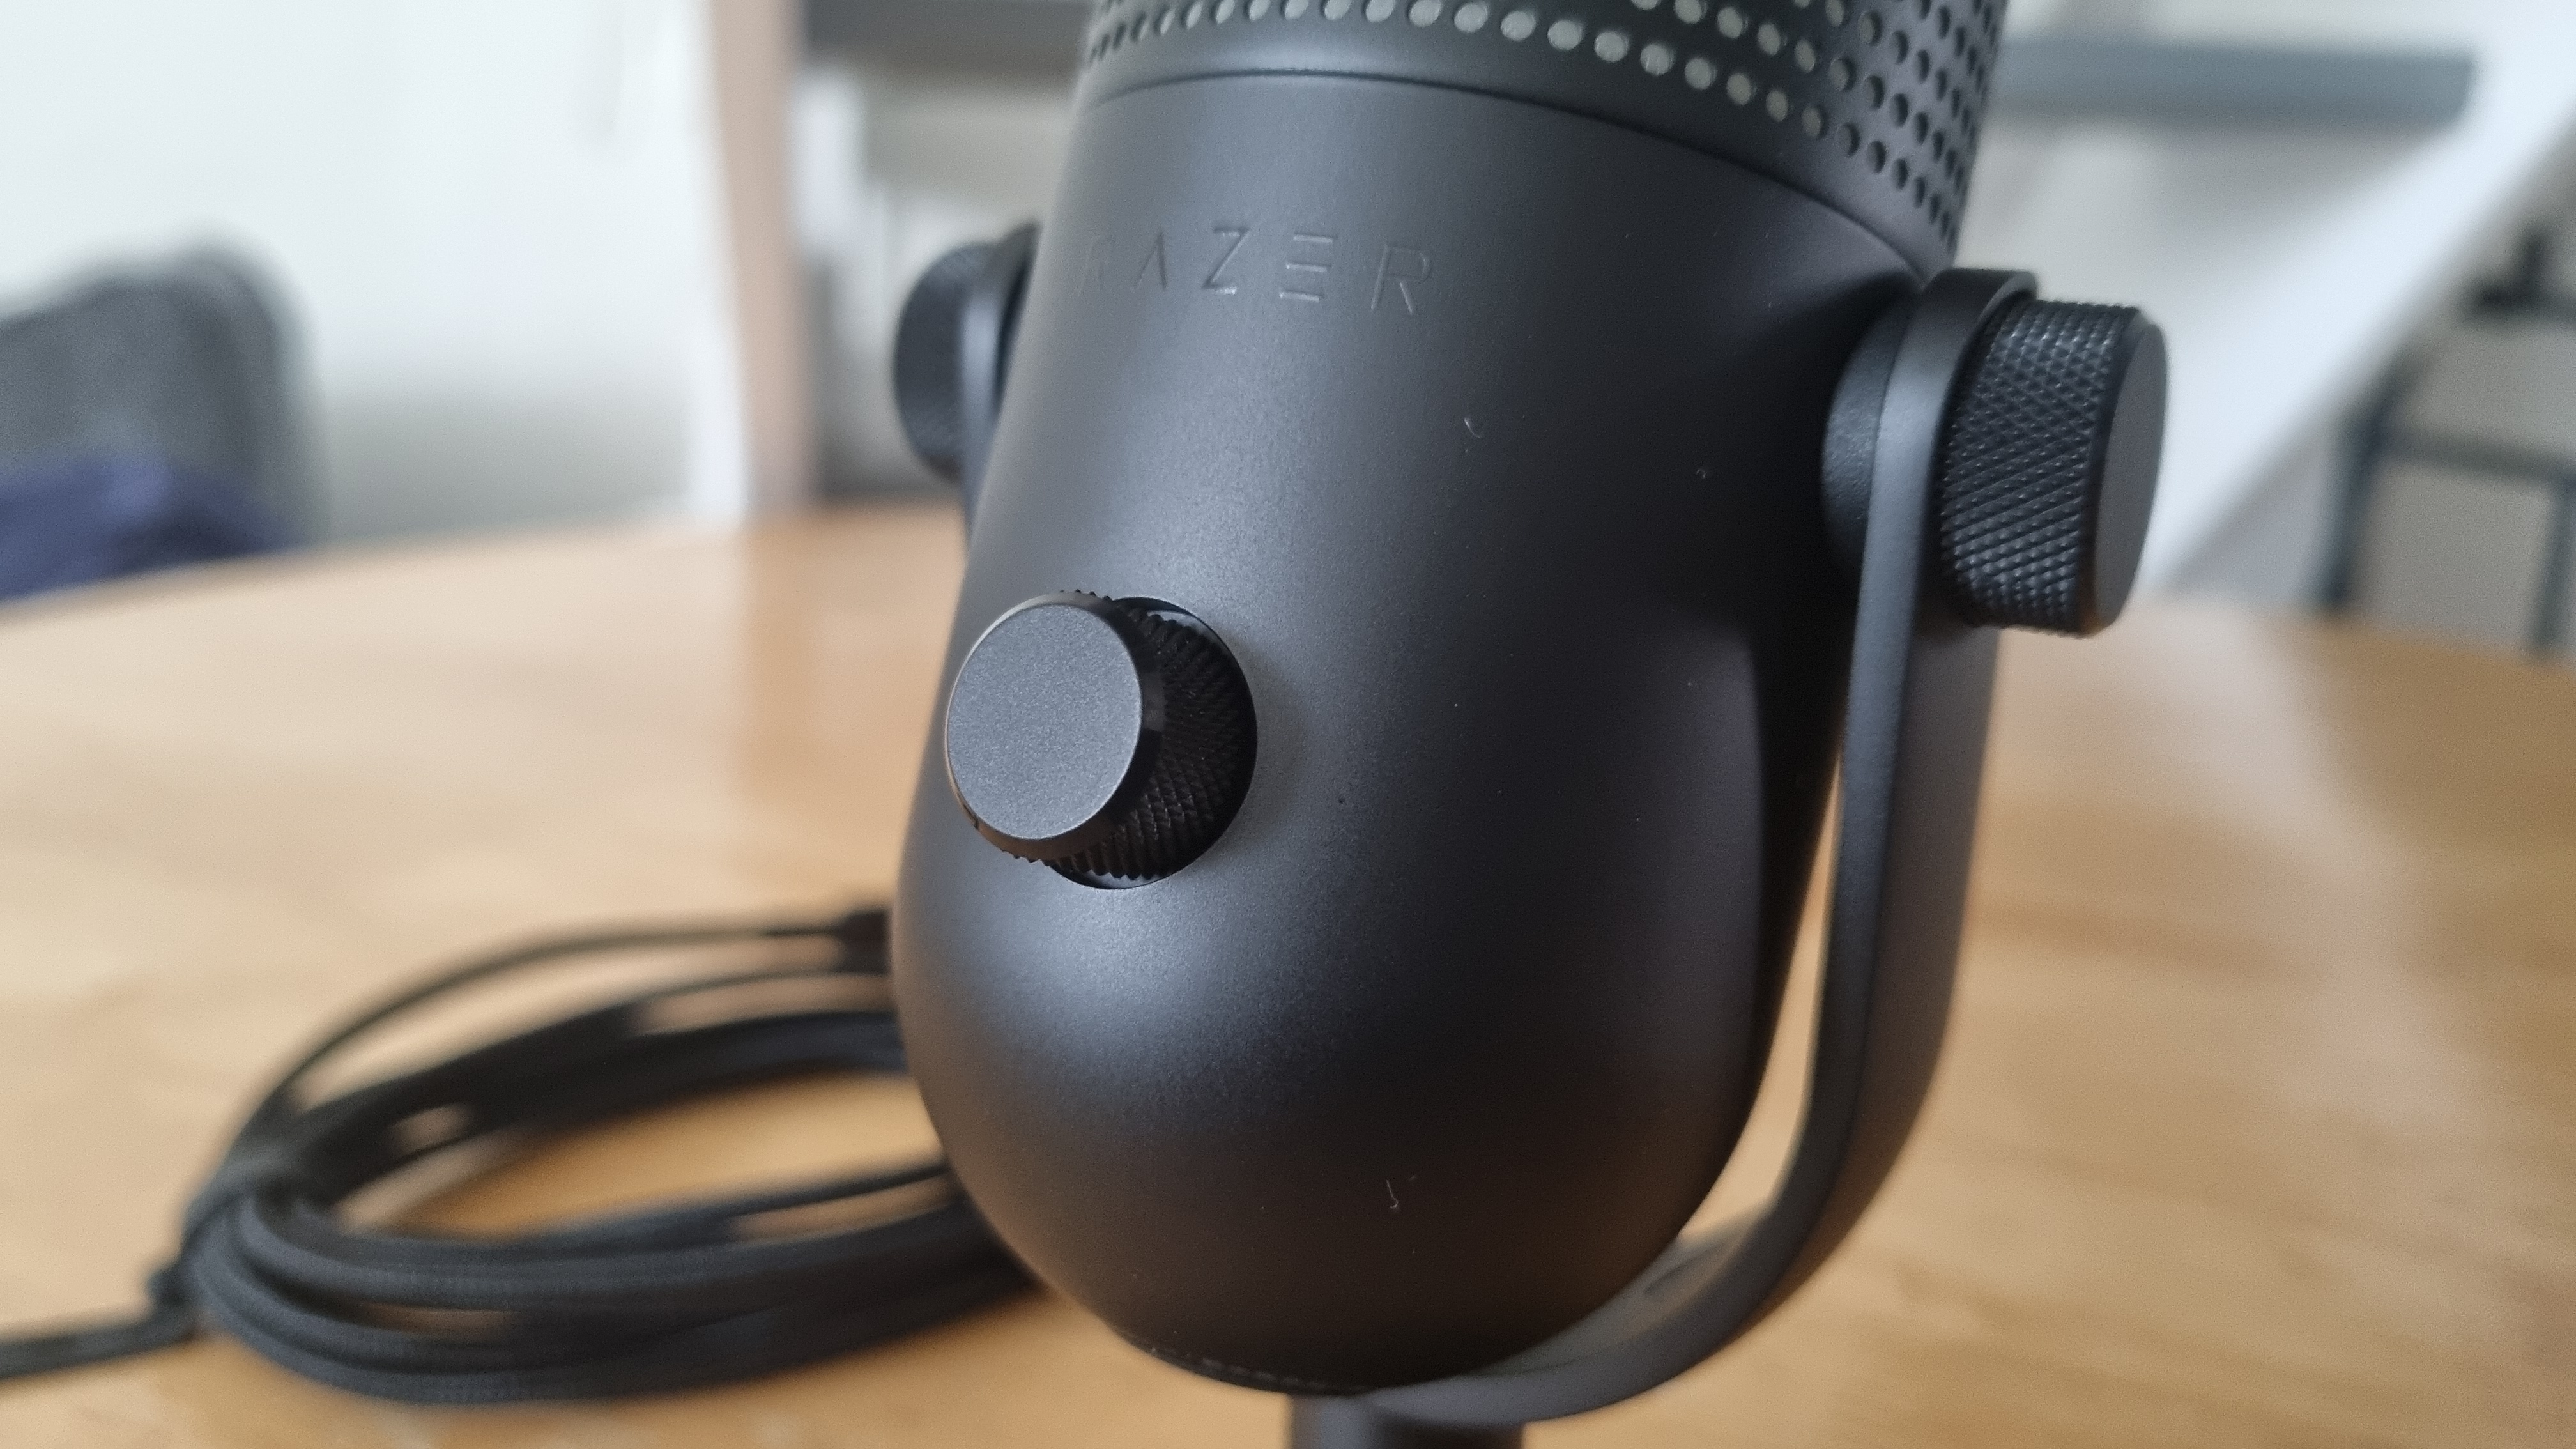 The volume and headphone gain dial on the front of the Razer Seiren V3 Chroma